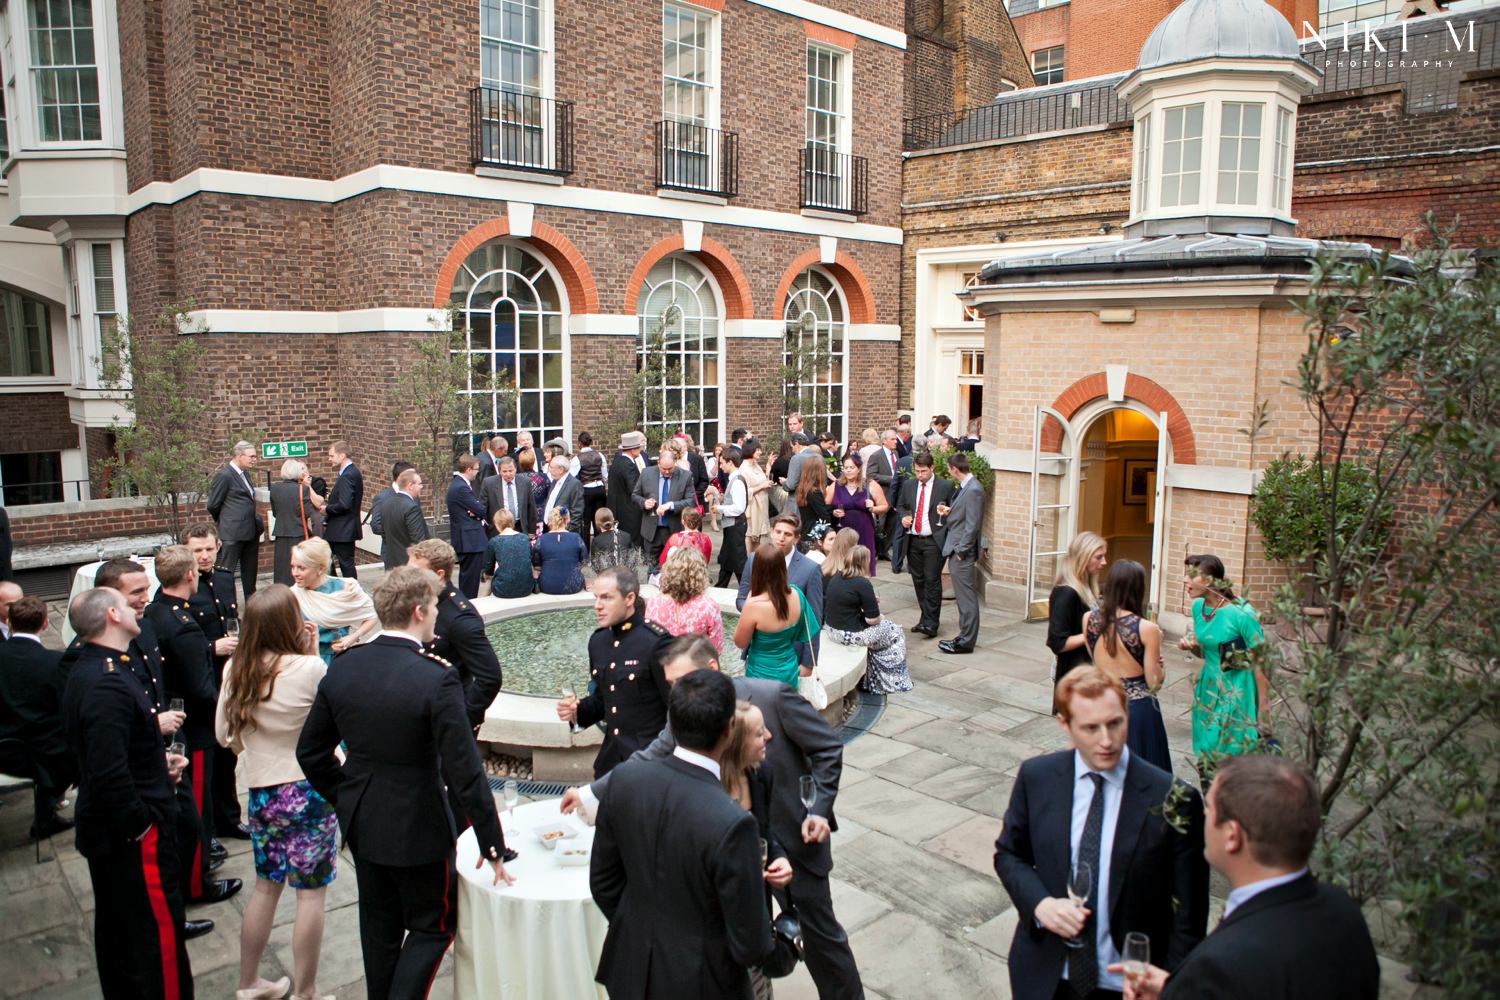 Skinners Hall London canapés after a Tower of London wedding